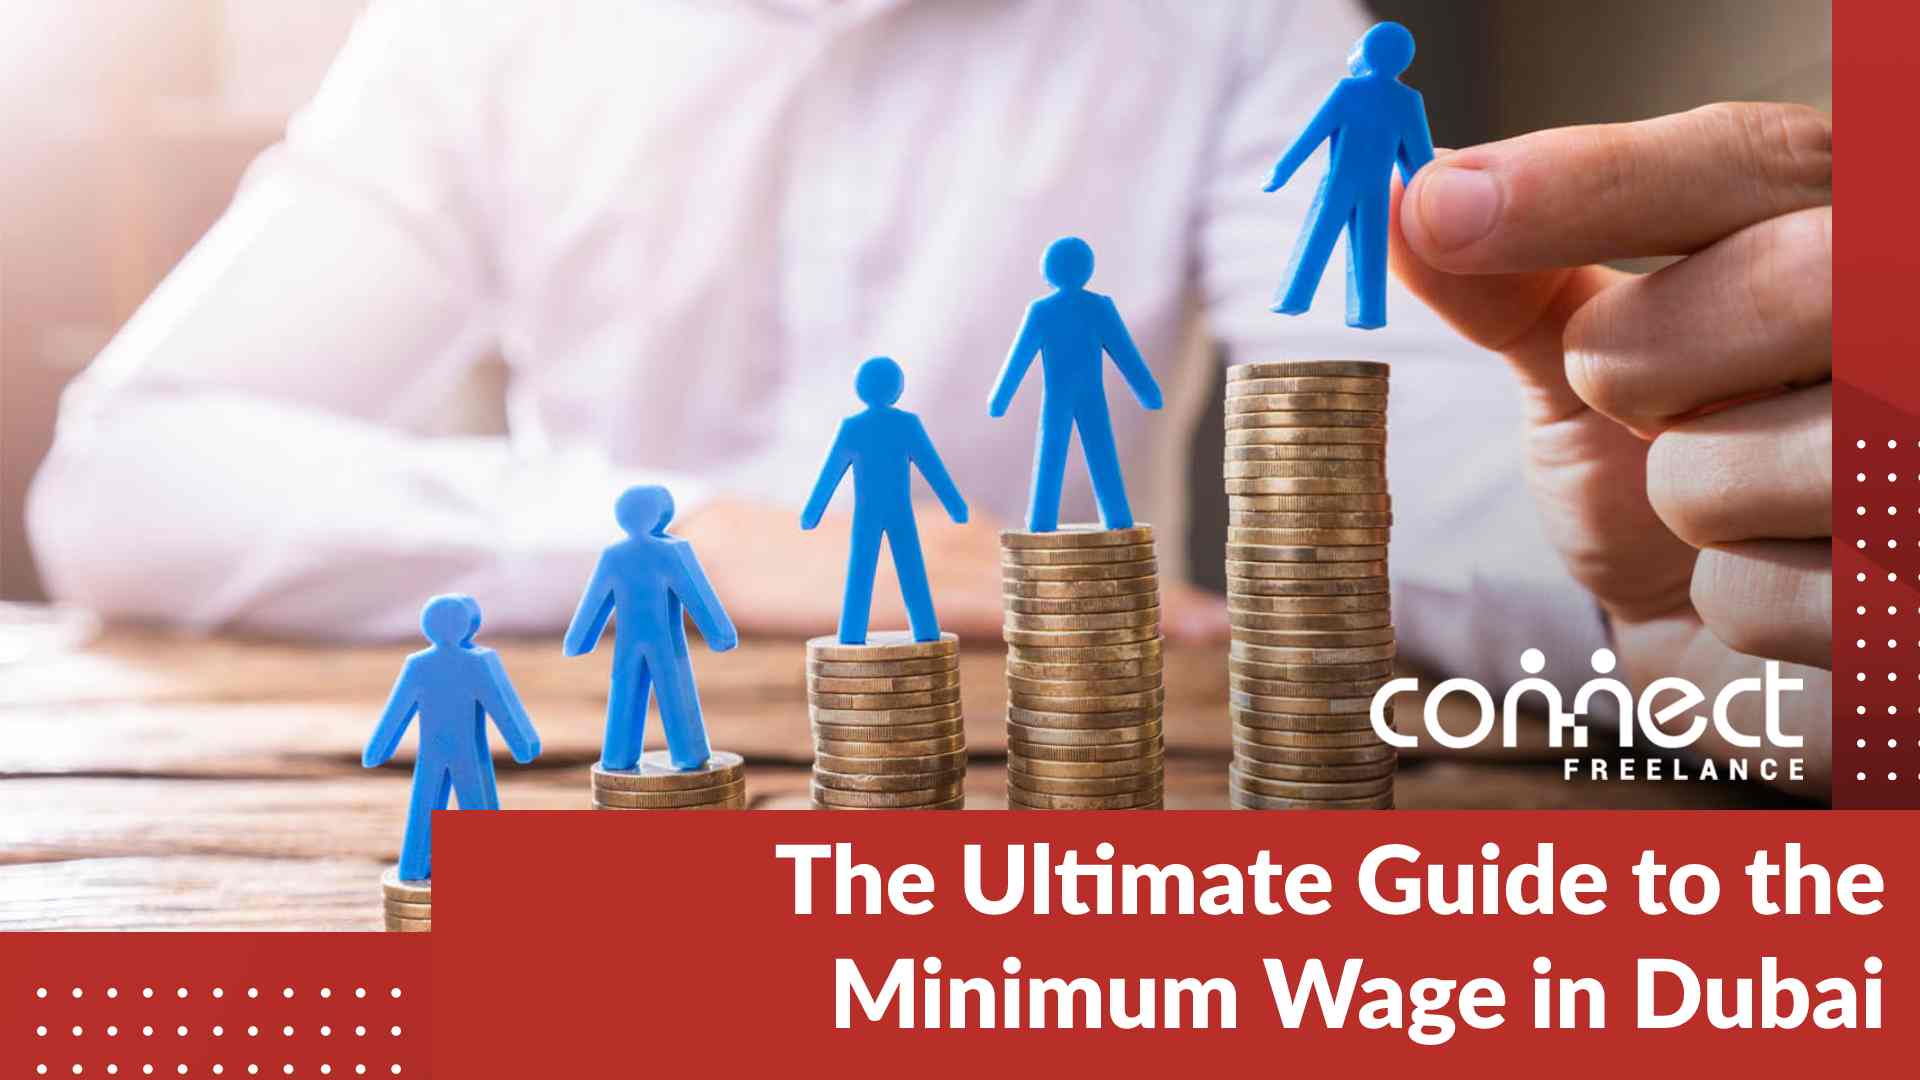 The Ultimate Guide to the Minimum Wage in Dubai